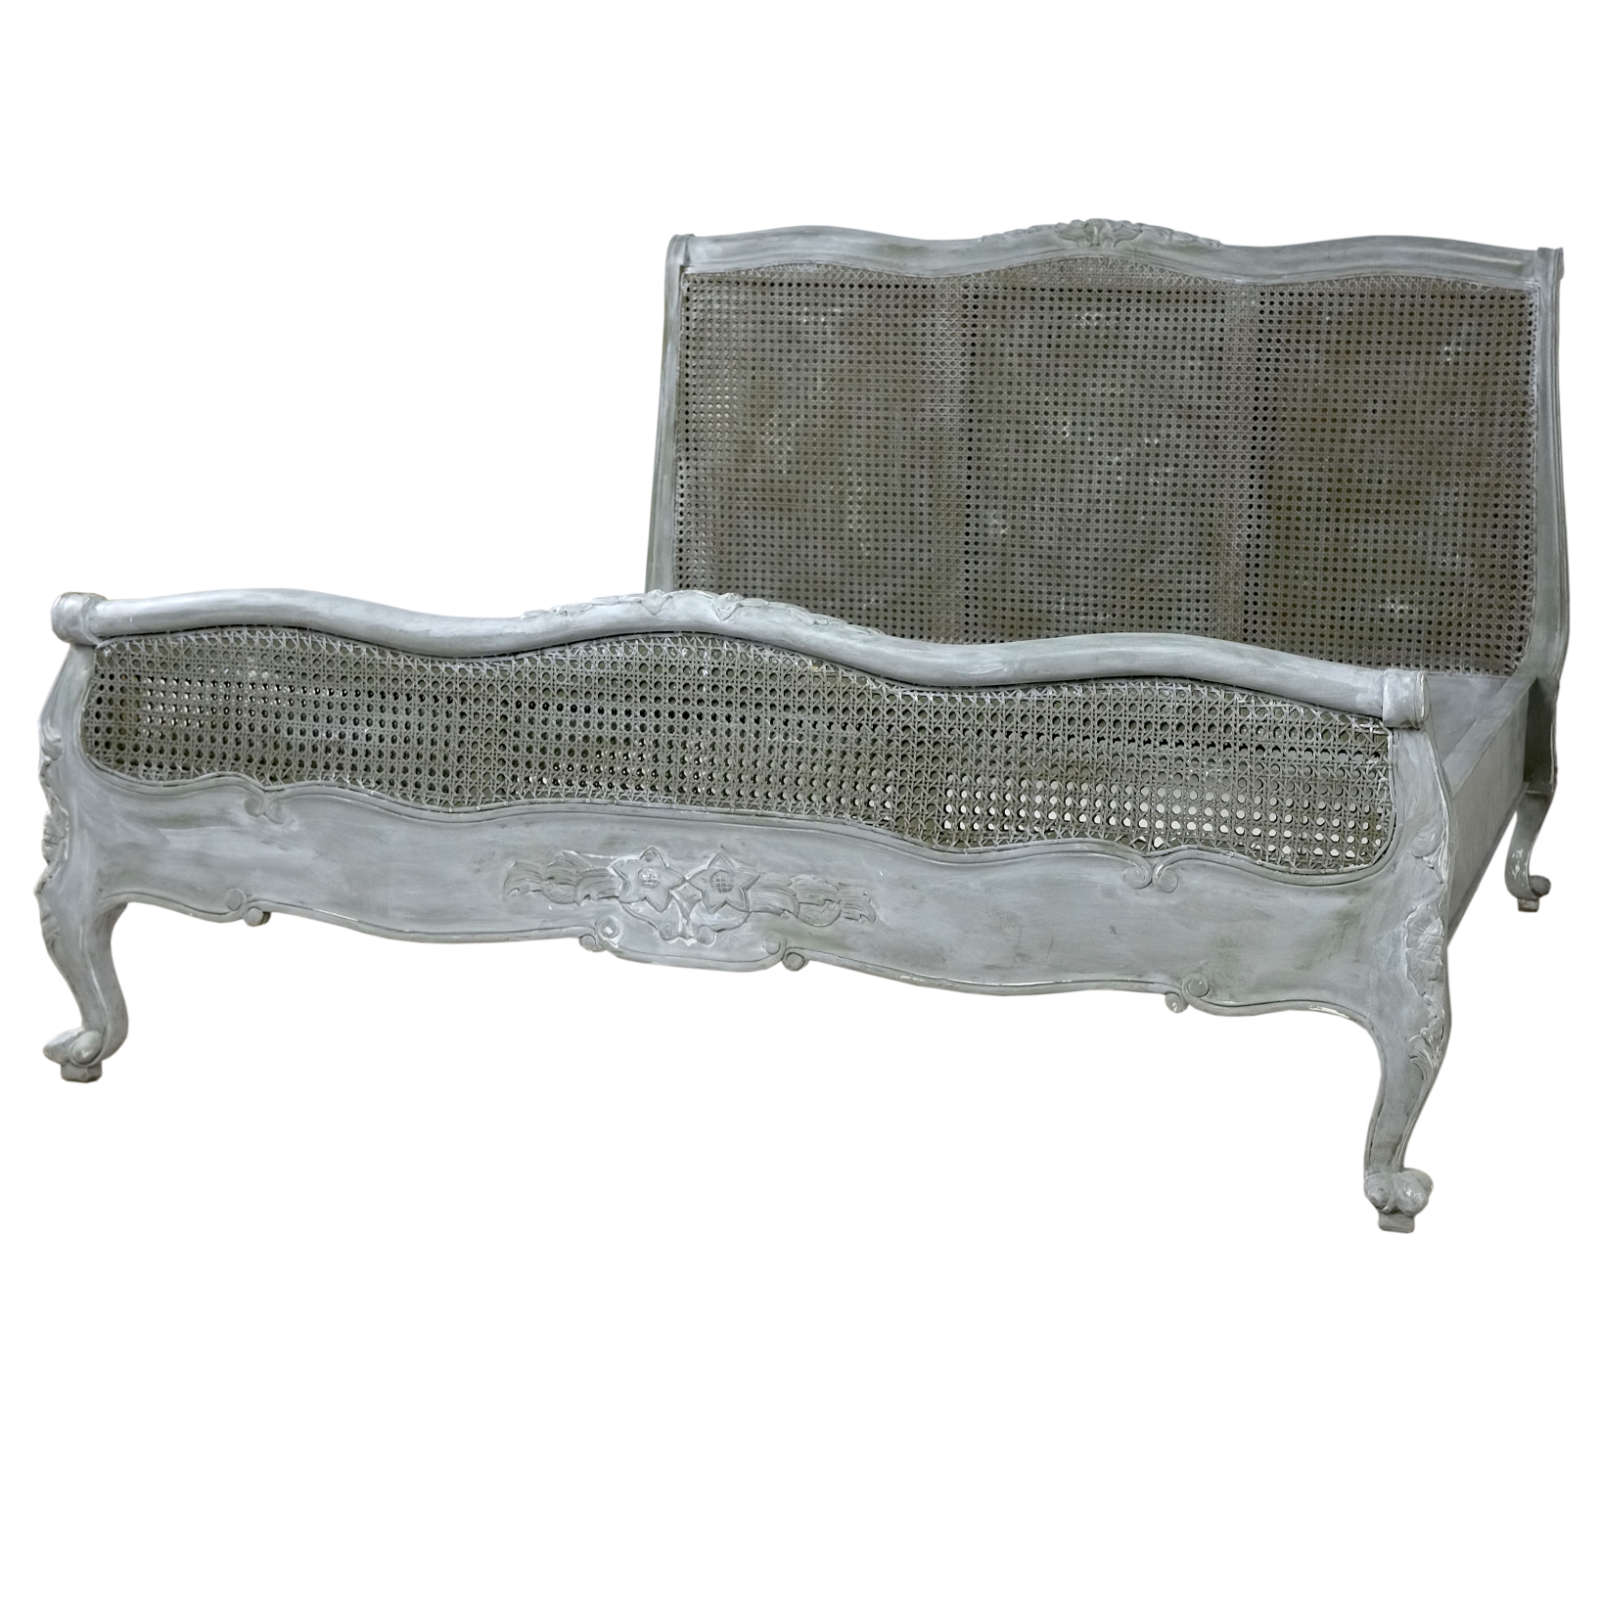 Olive French distressed rattan bed